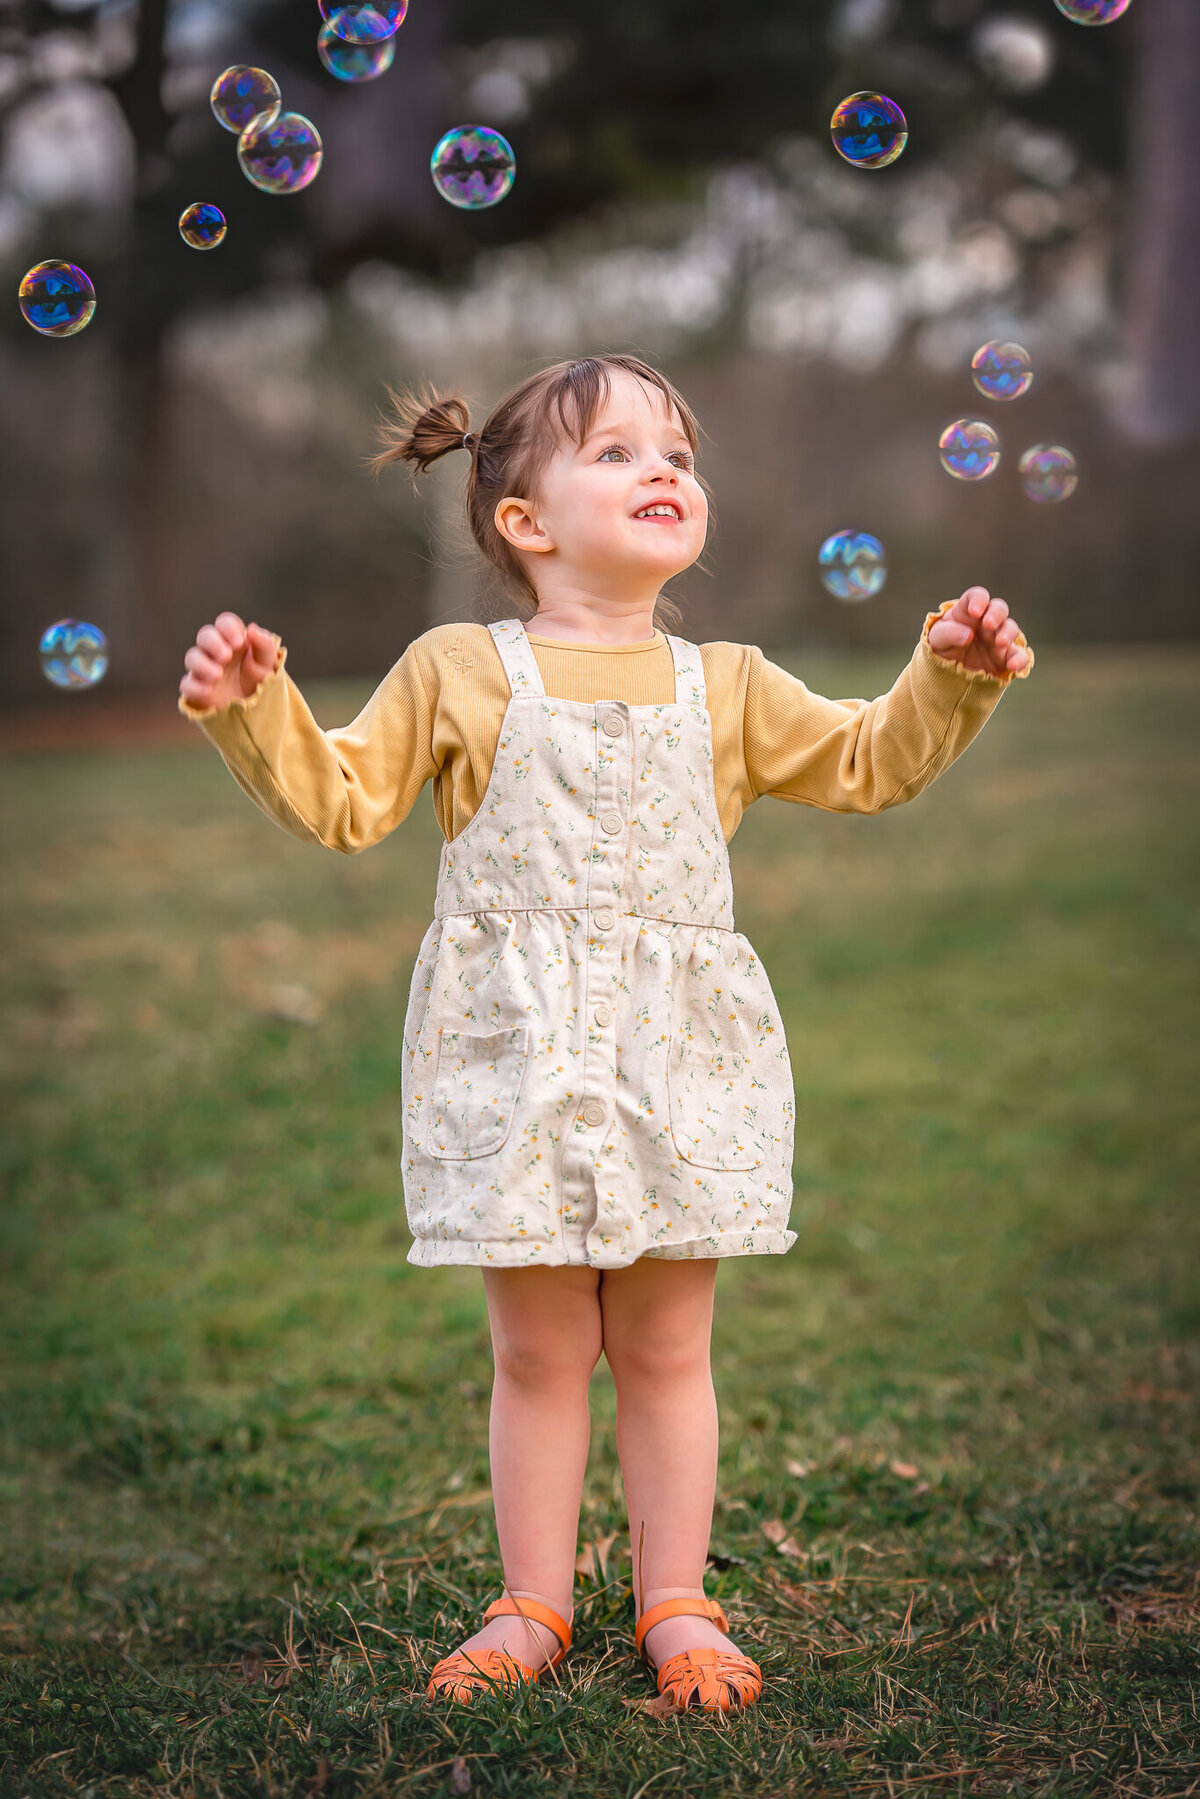 A little girl in a yellow shirt is looking at bubbles floating though the air.